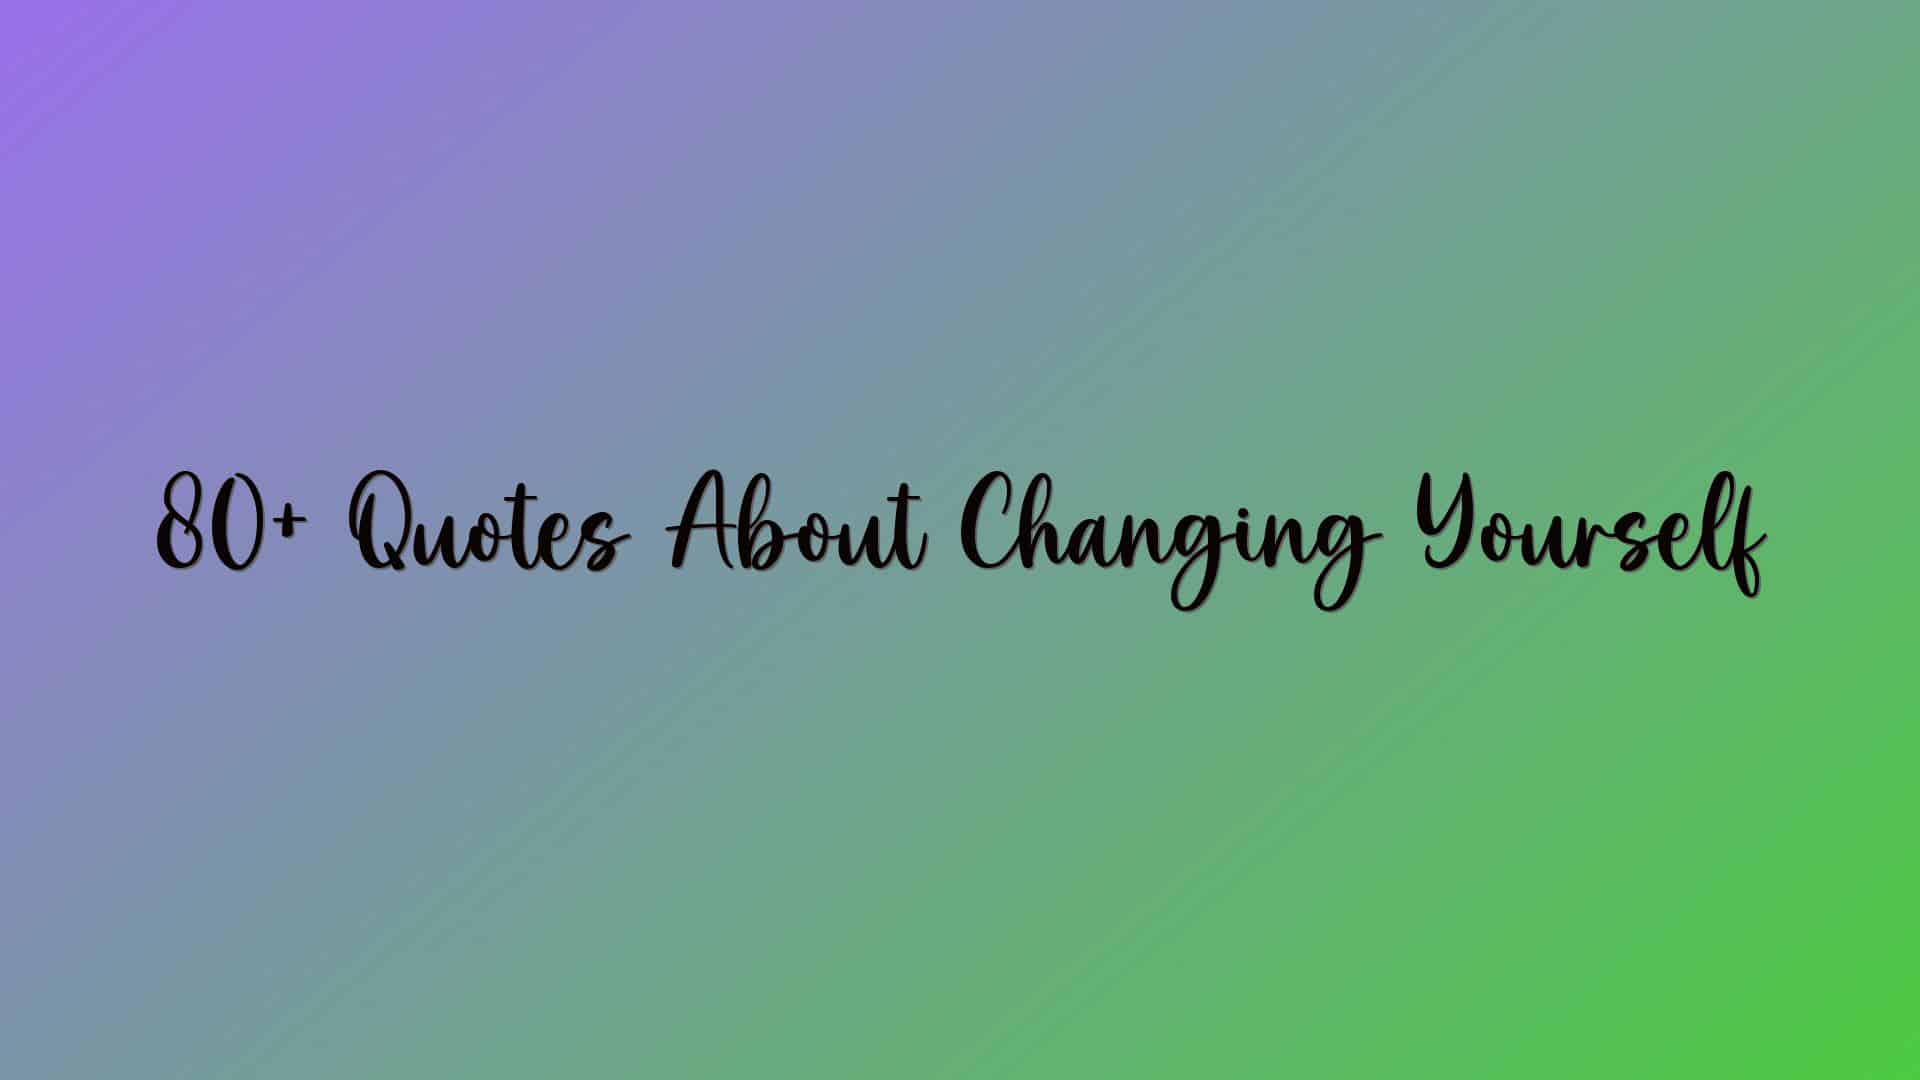 80+ Quotes About Changing Yourself